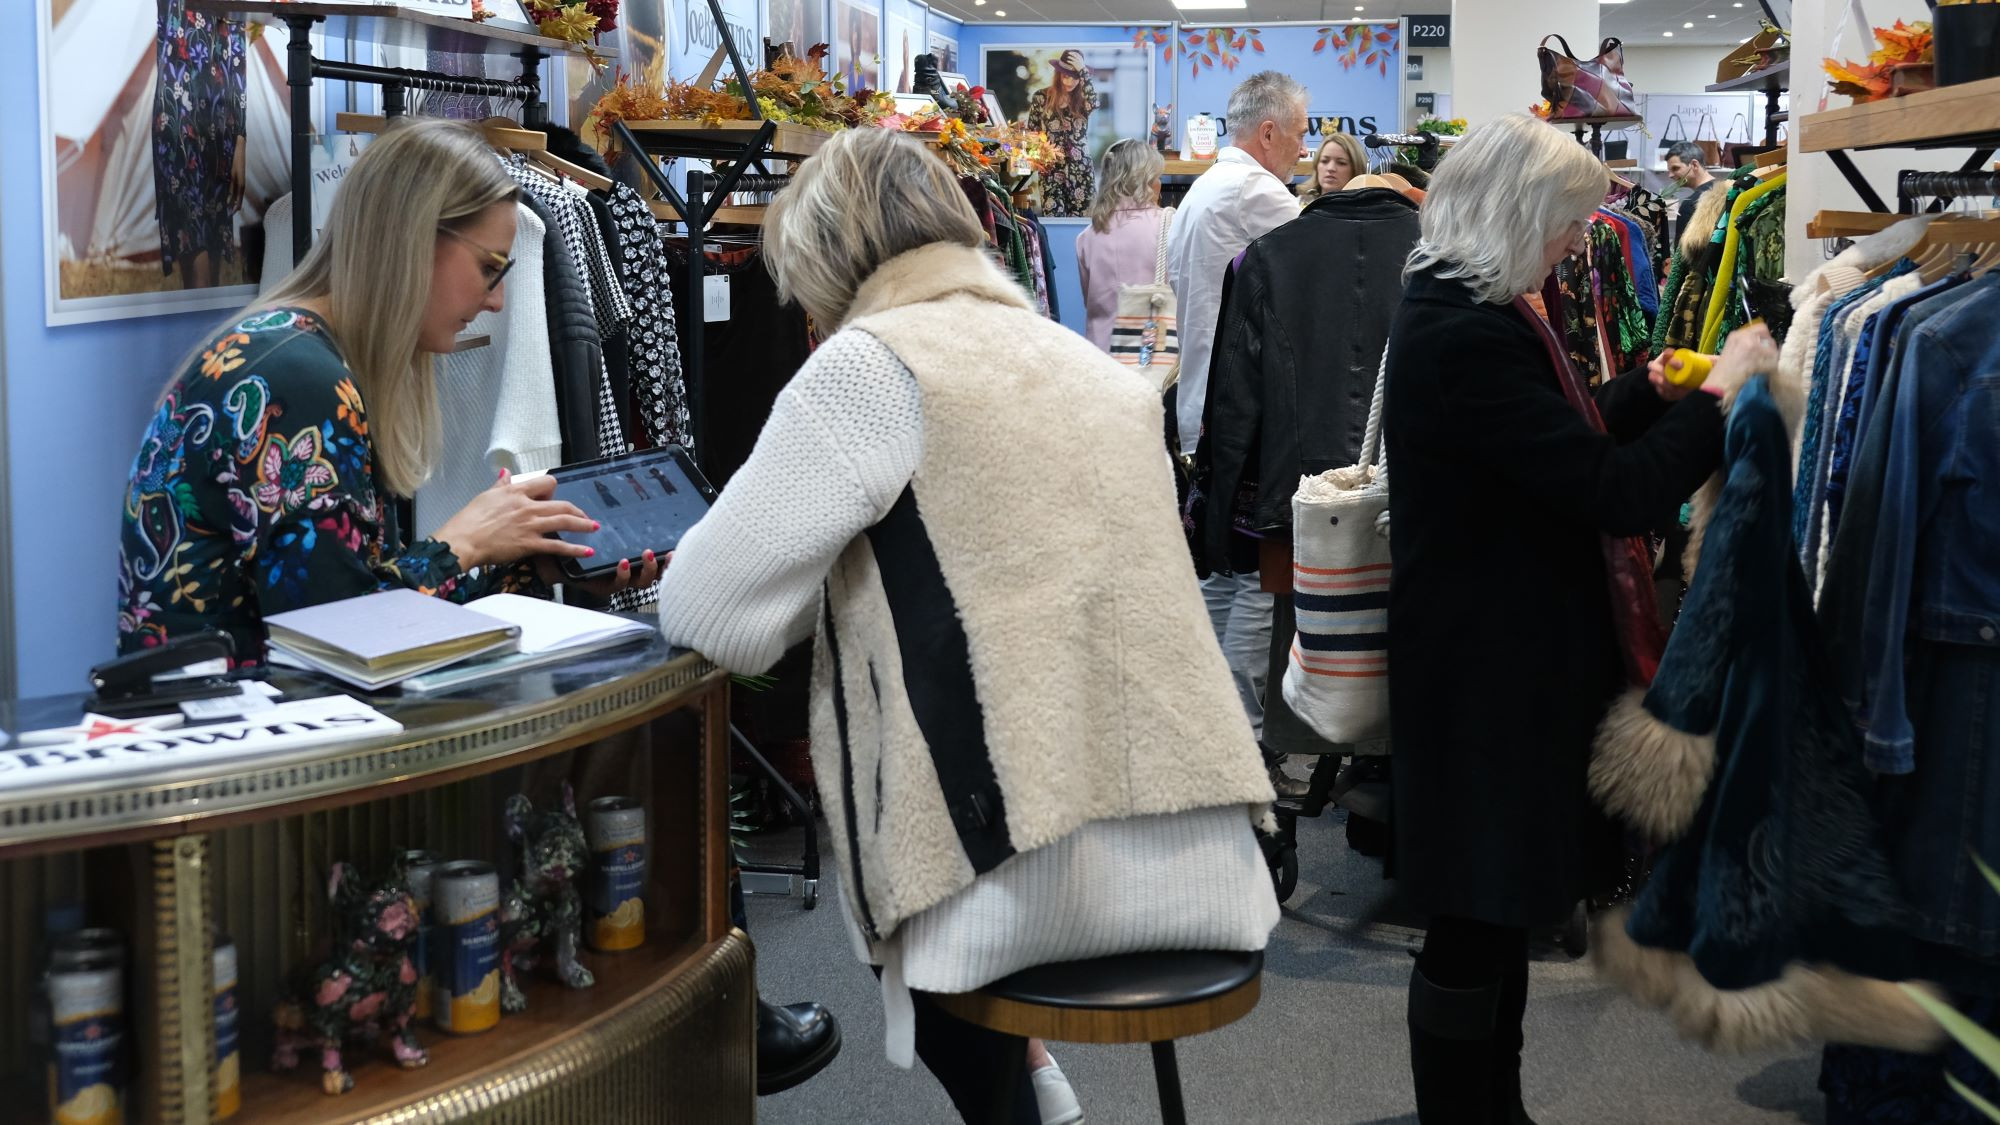 INDX clothing trade show at cranmore park